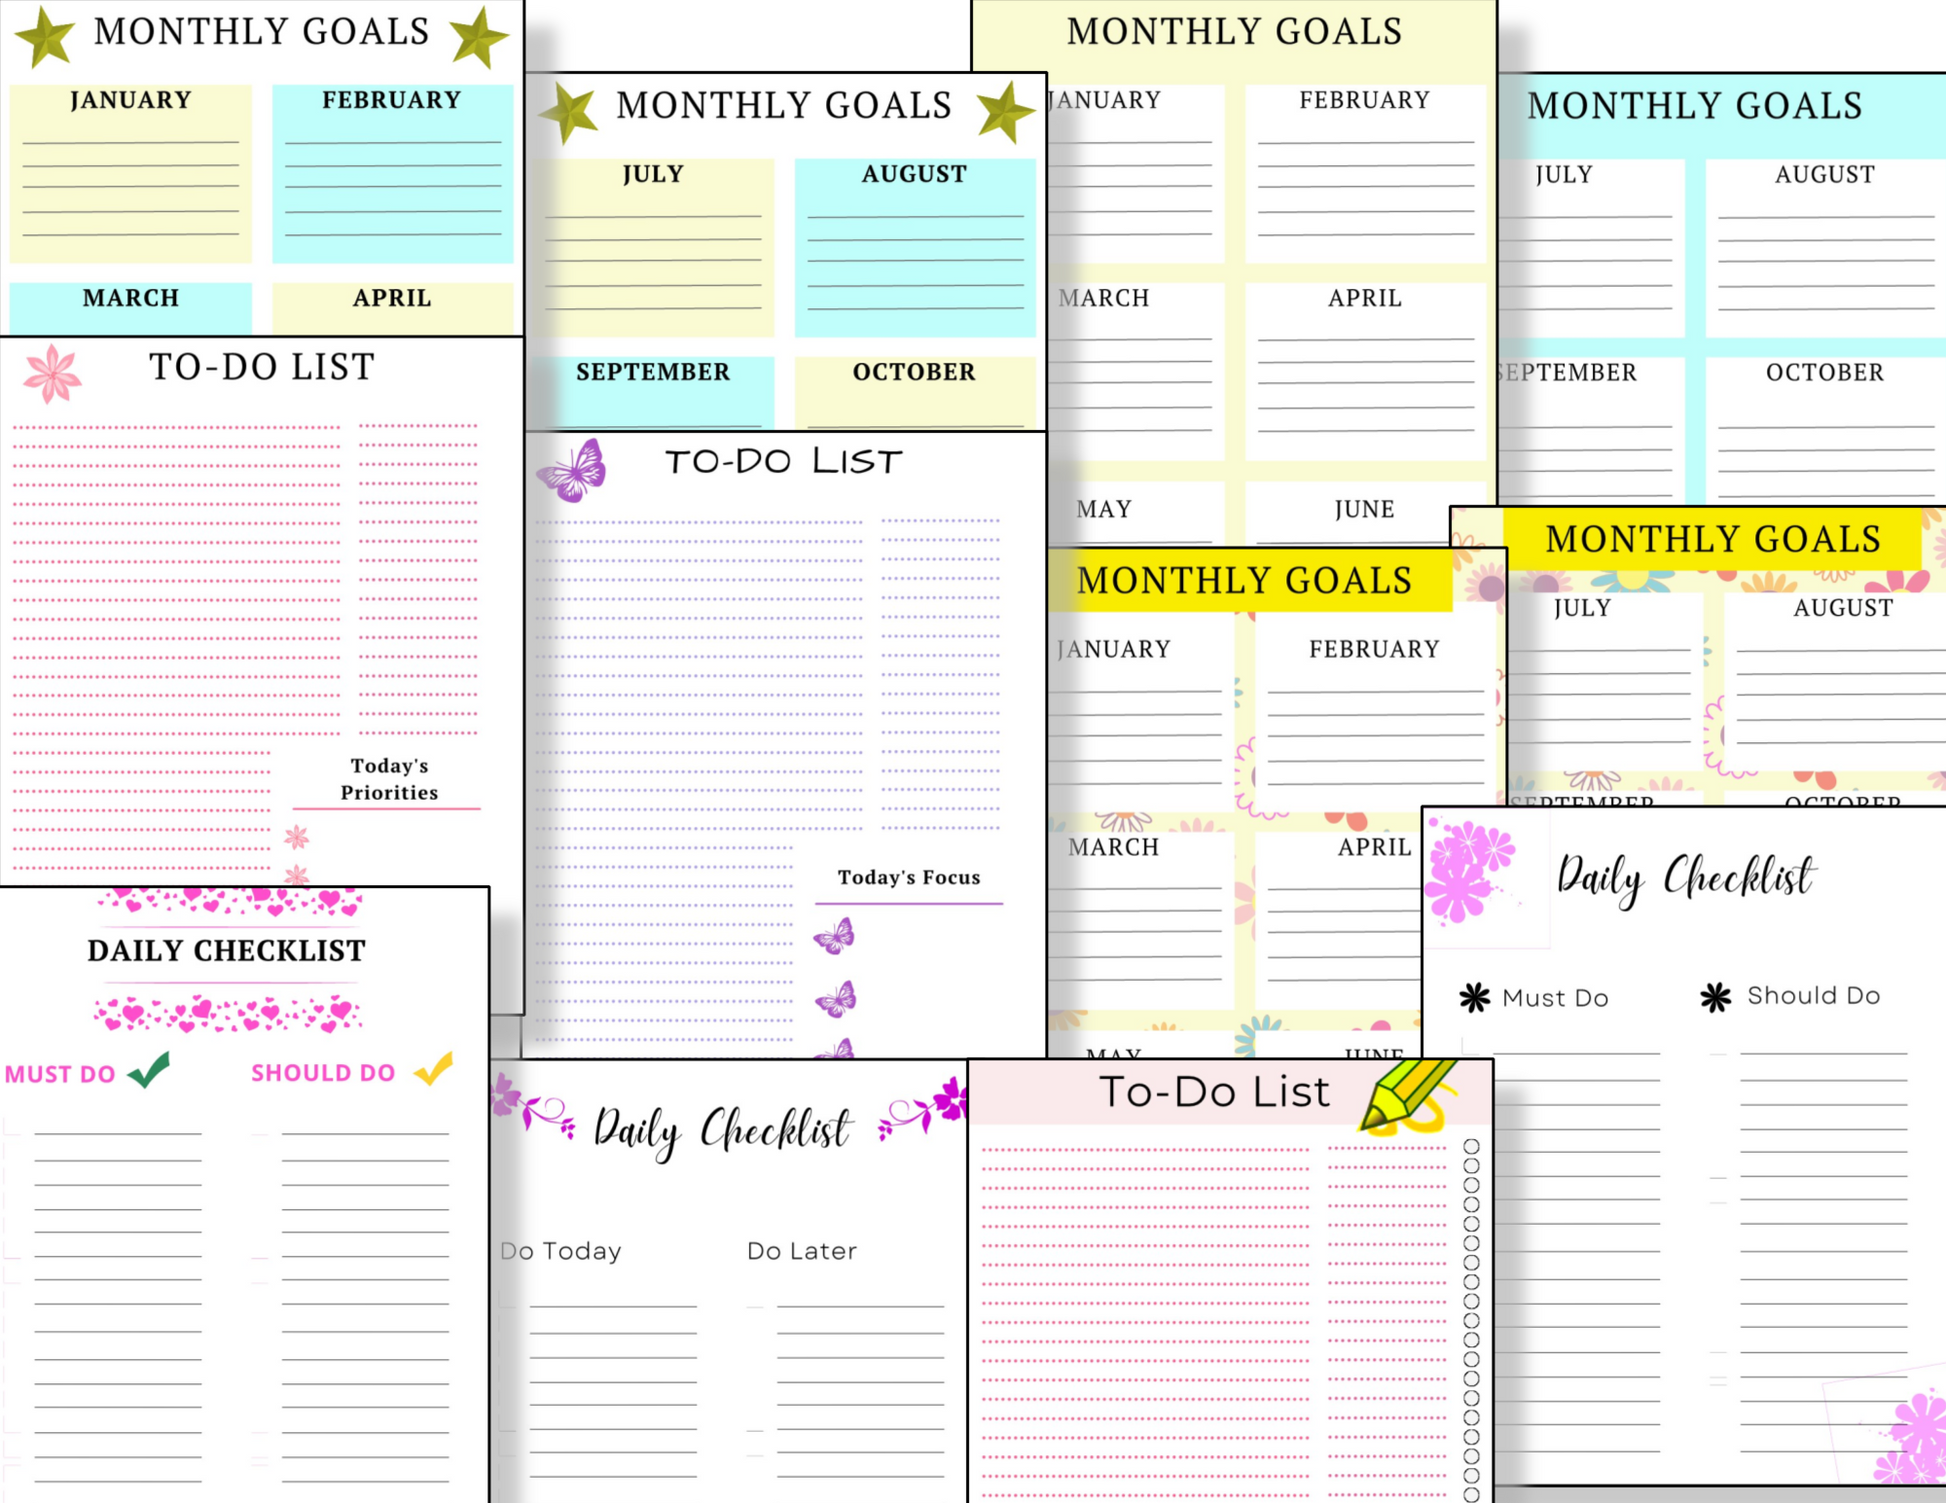 A collection of Organized 31 Shop printable planners with different colors and designs, including the 12 To Do Lists Plus Monthly Goals.